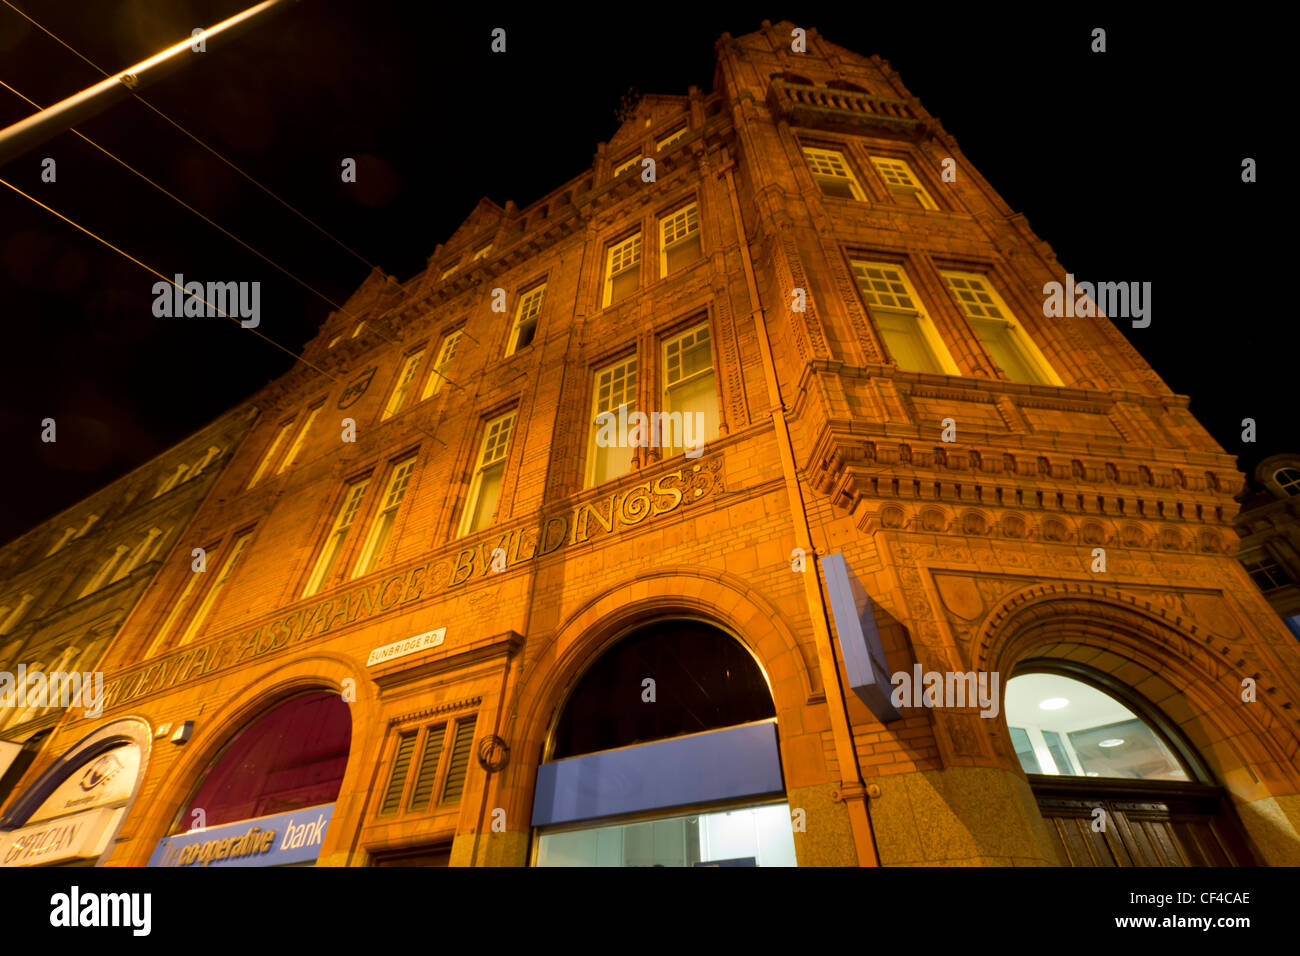 The Co-Operative Bank, Sunbridge Road Bradford, photographed at night. Built in 1985 of red brick and terracotta. Stock Photo